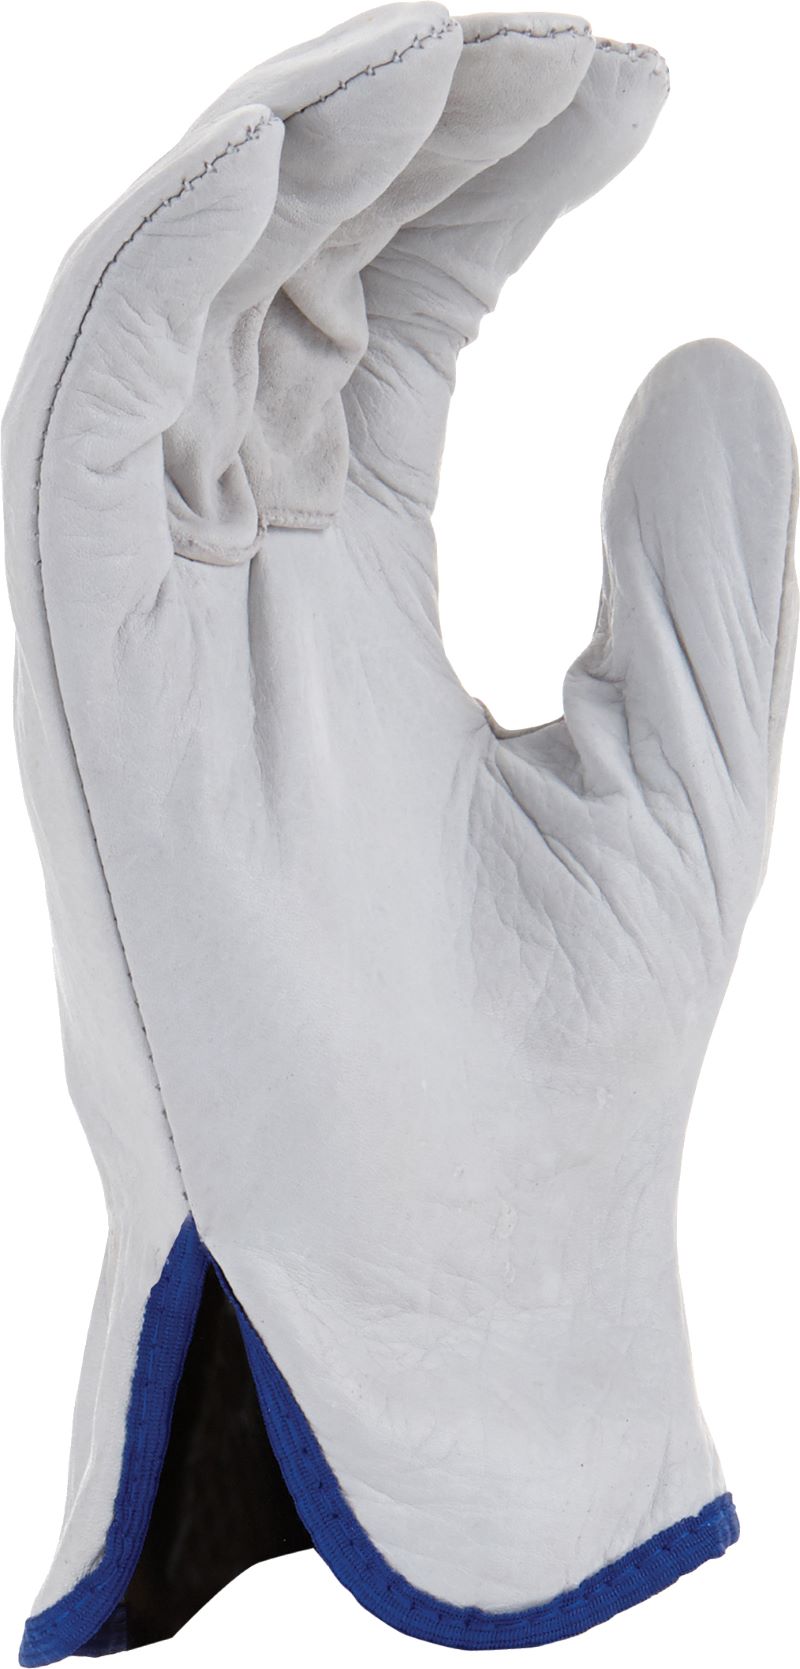 GRB140 - Maxisafe Natural Full-Grain Leather Rigger Glove